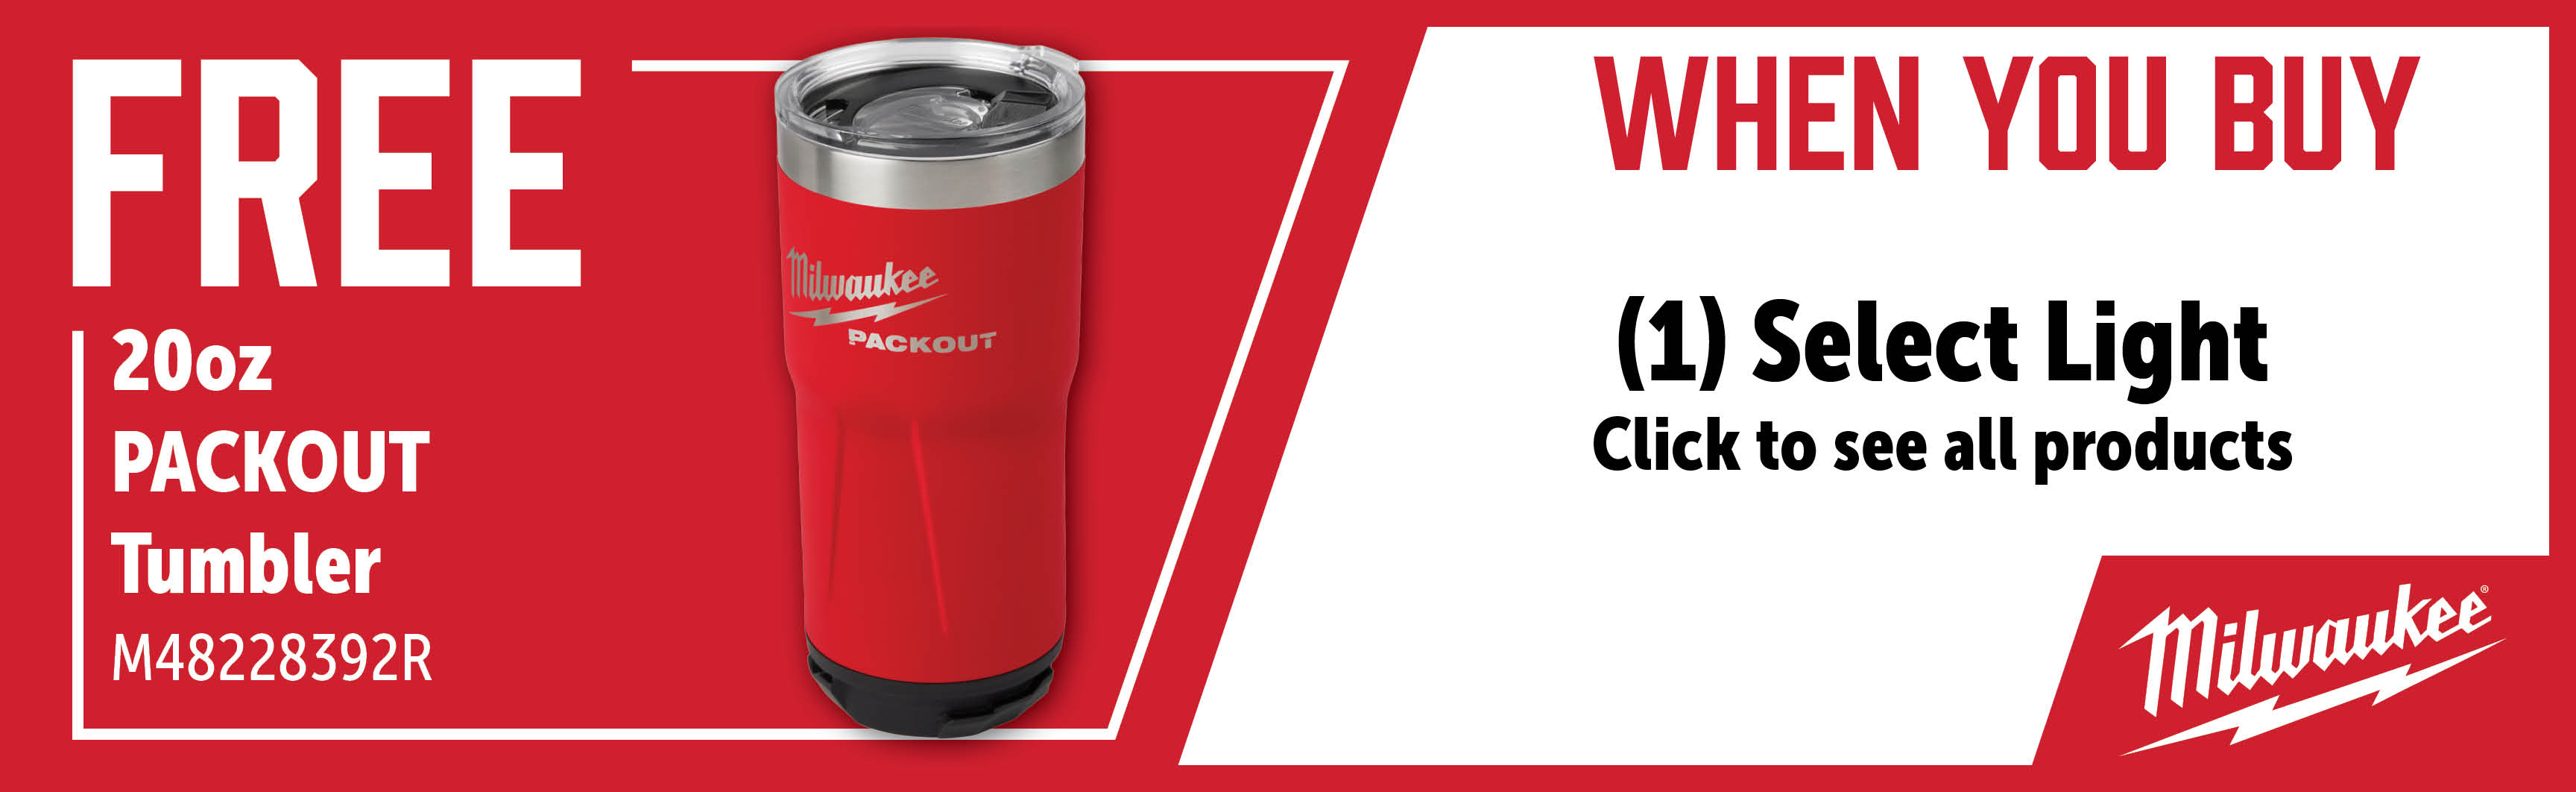 Milwaukee May - July: Buy a Qualifying Light and get a FREE M48228392R Tumbler